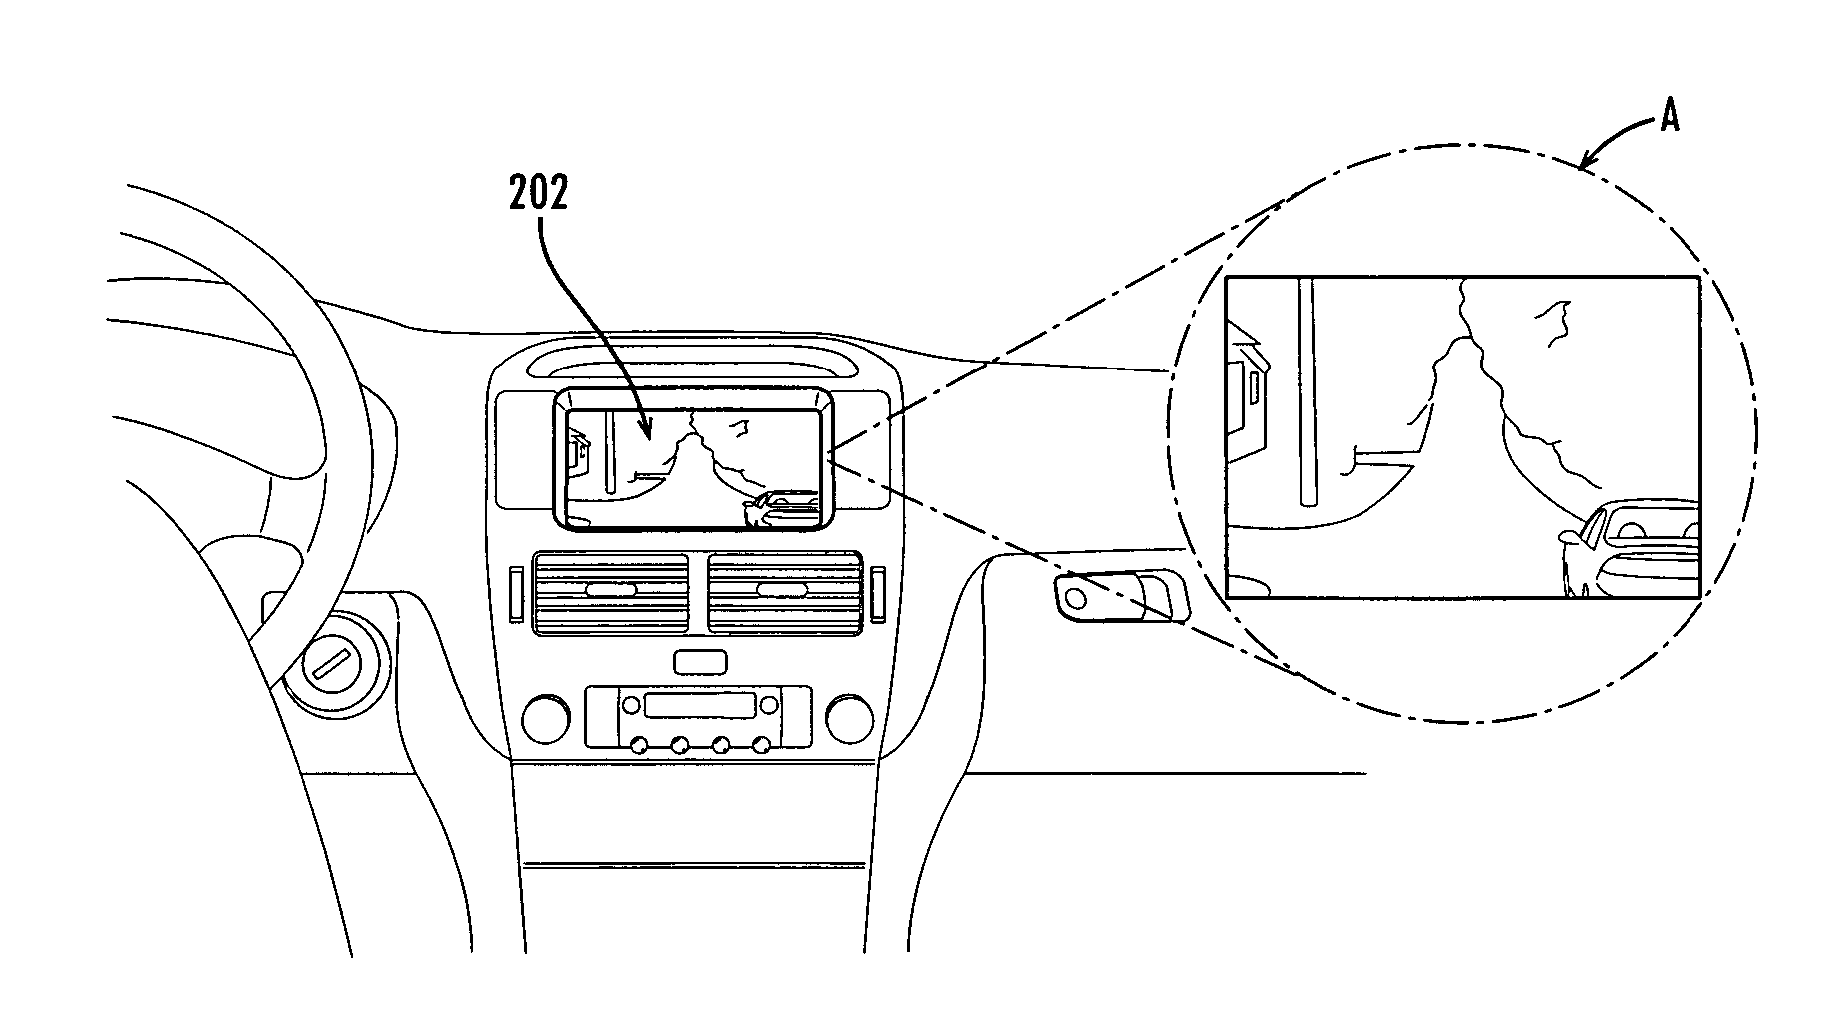 Image-enhanced vehicle navigation systems and methods